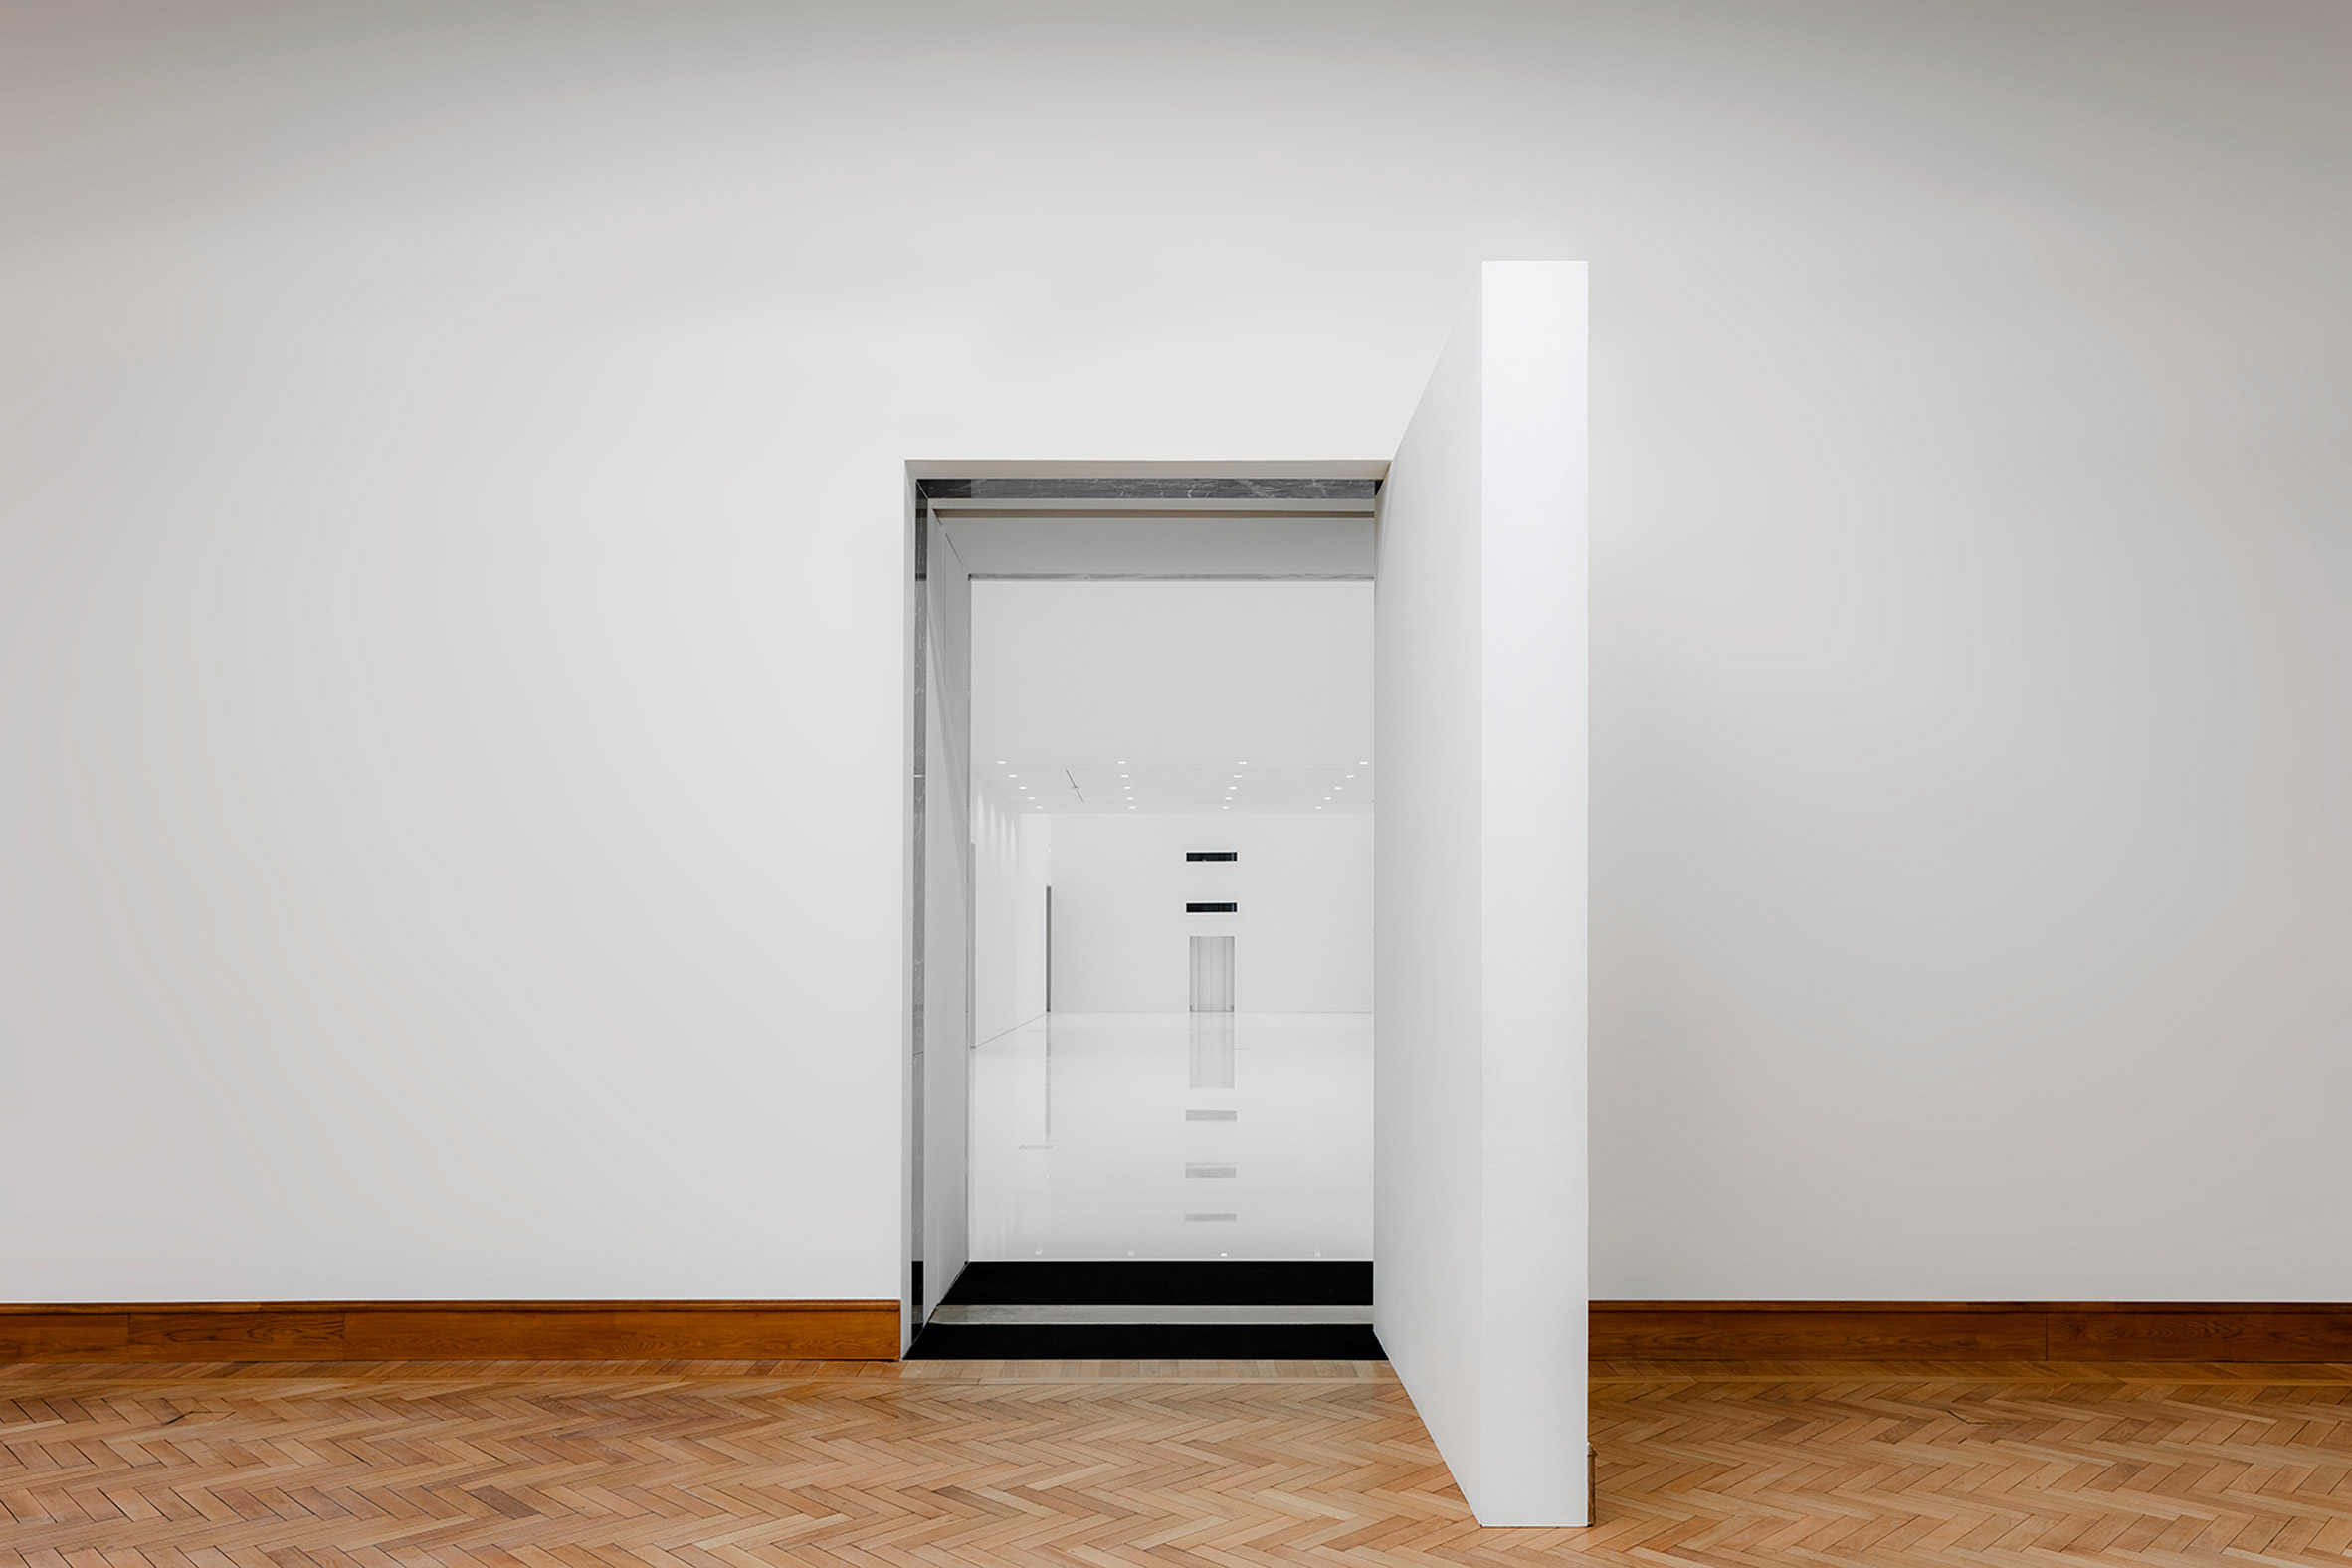 Entrance to minimalist extension of Royal Museum of Fine Arts Antwerp 